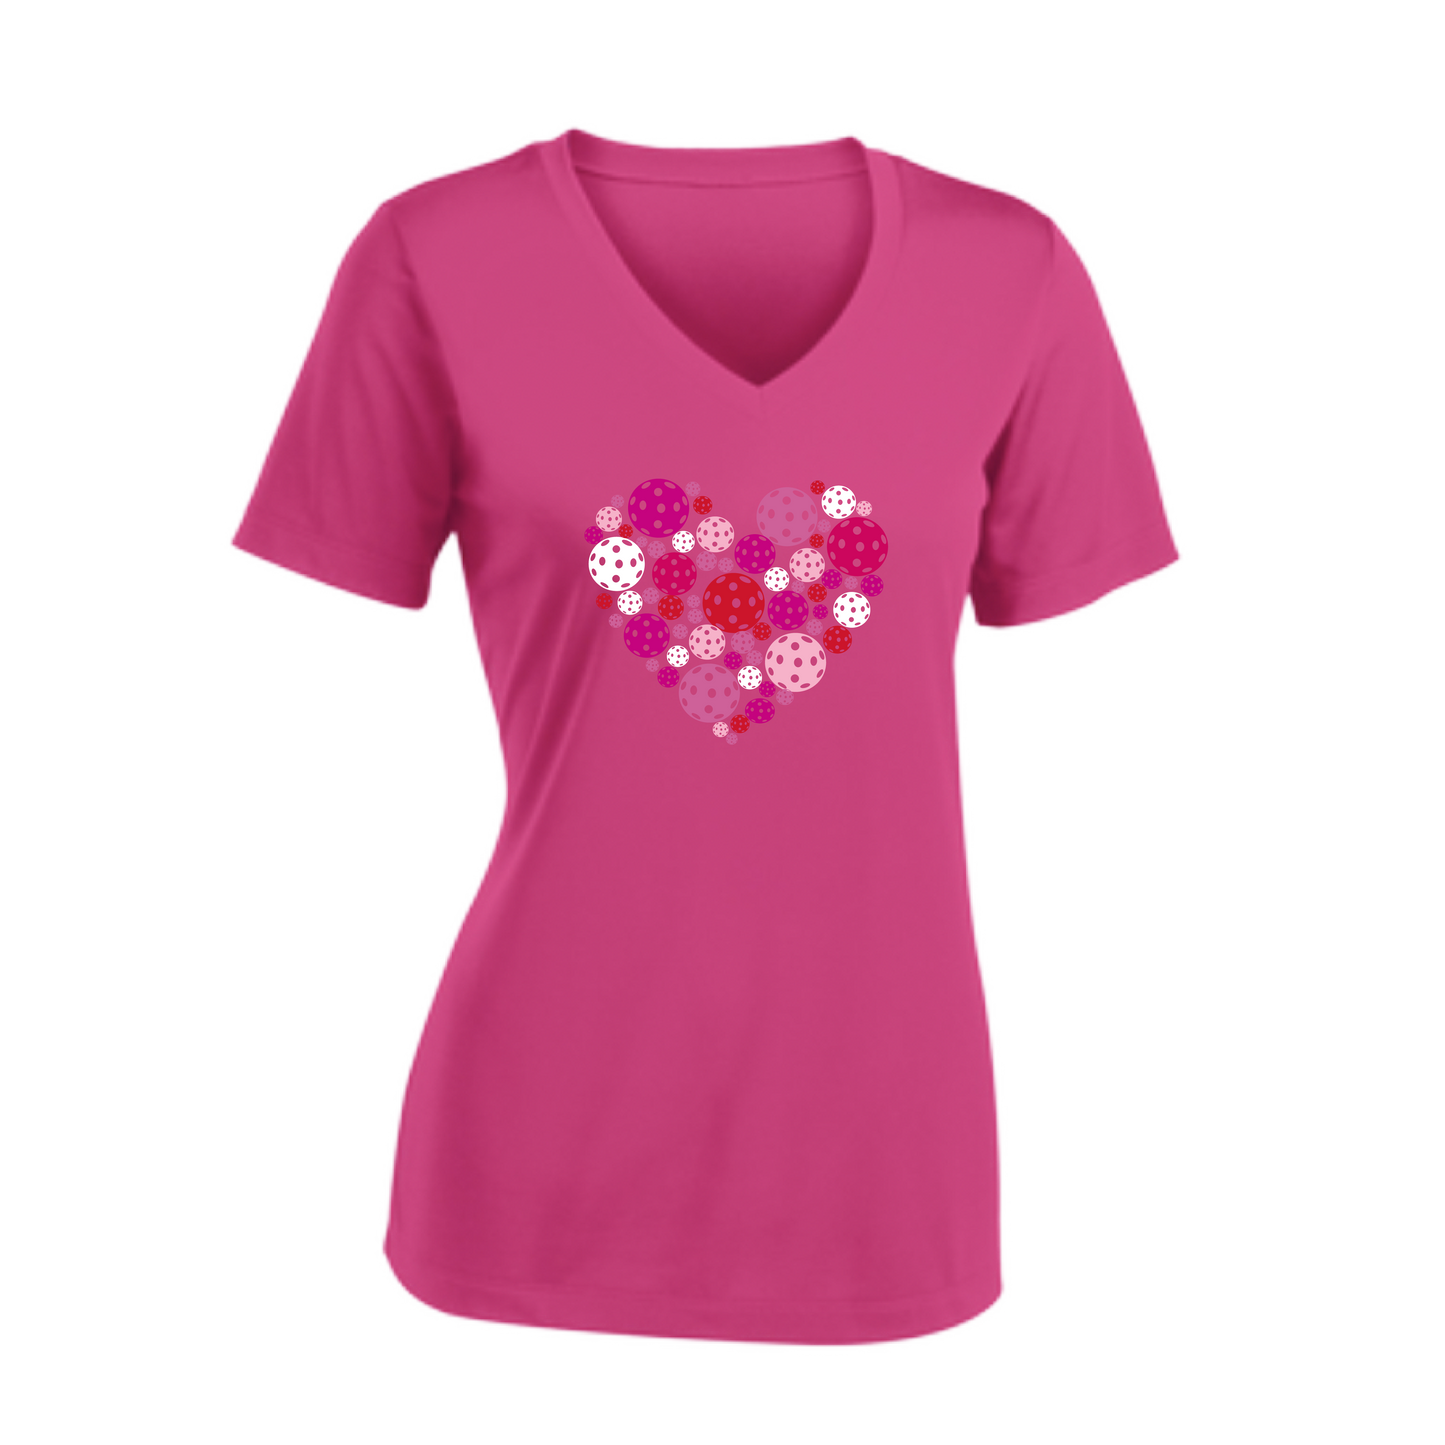 This women's pickleball shirt offers a combination of superior softness and style. The ultra-comfortable material wicks away moisture, features a tri-blend softness, and is equipped with PosiCharge technology that retains color. It's highly breathable and lightweight.